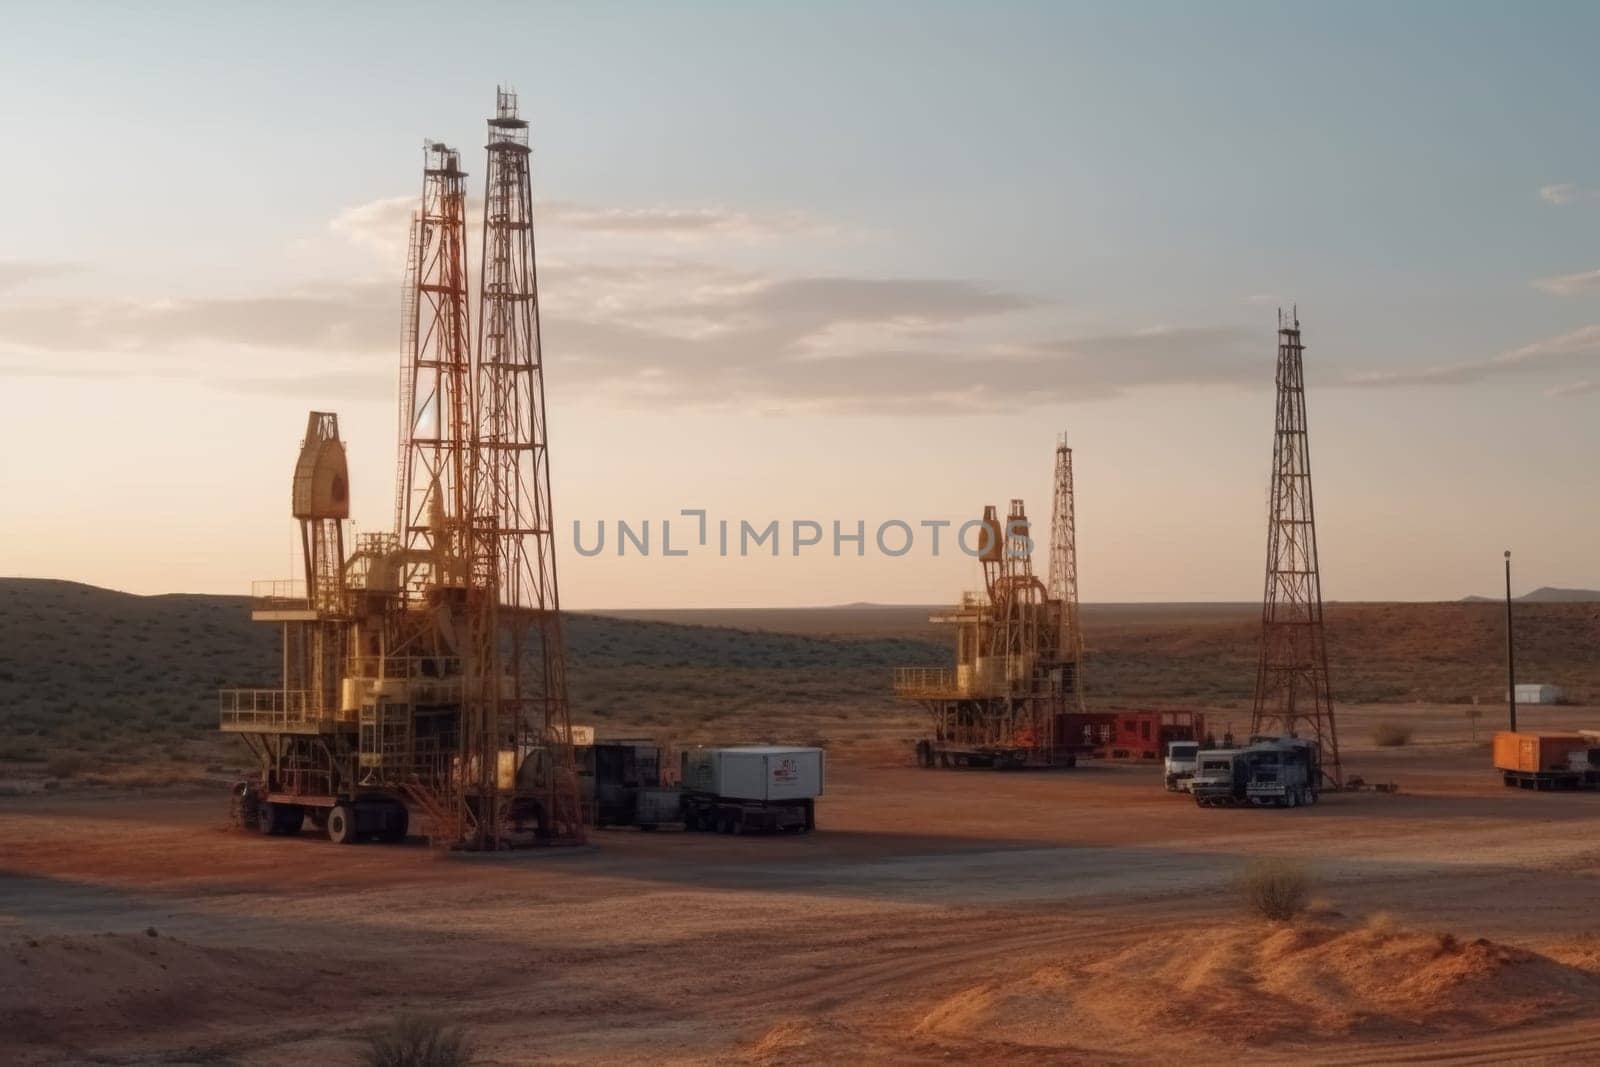 Image capturing the industrial might of oil drilling rigs against the backdrop of a vast, sandy desert under a clear sky.